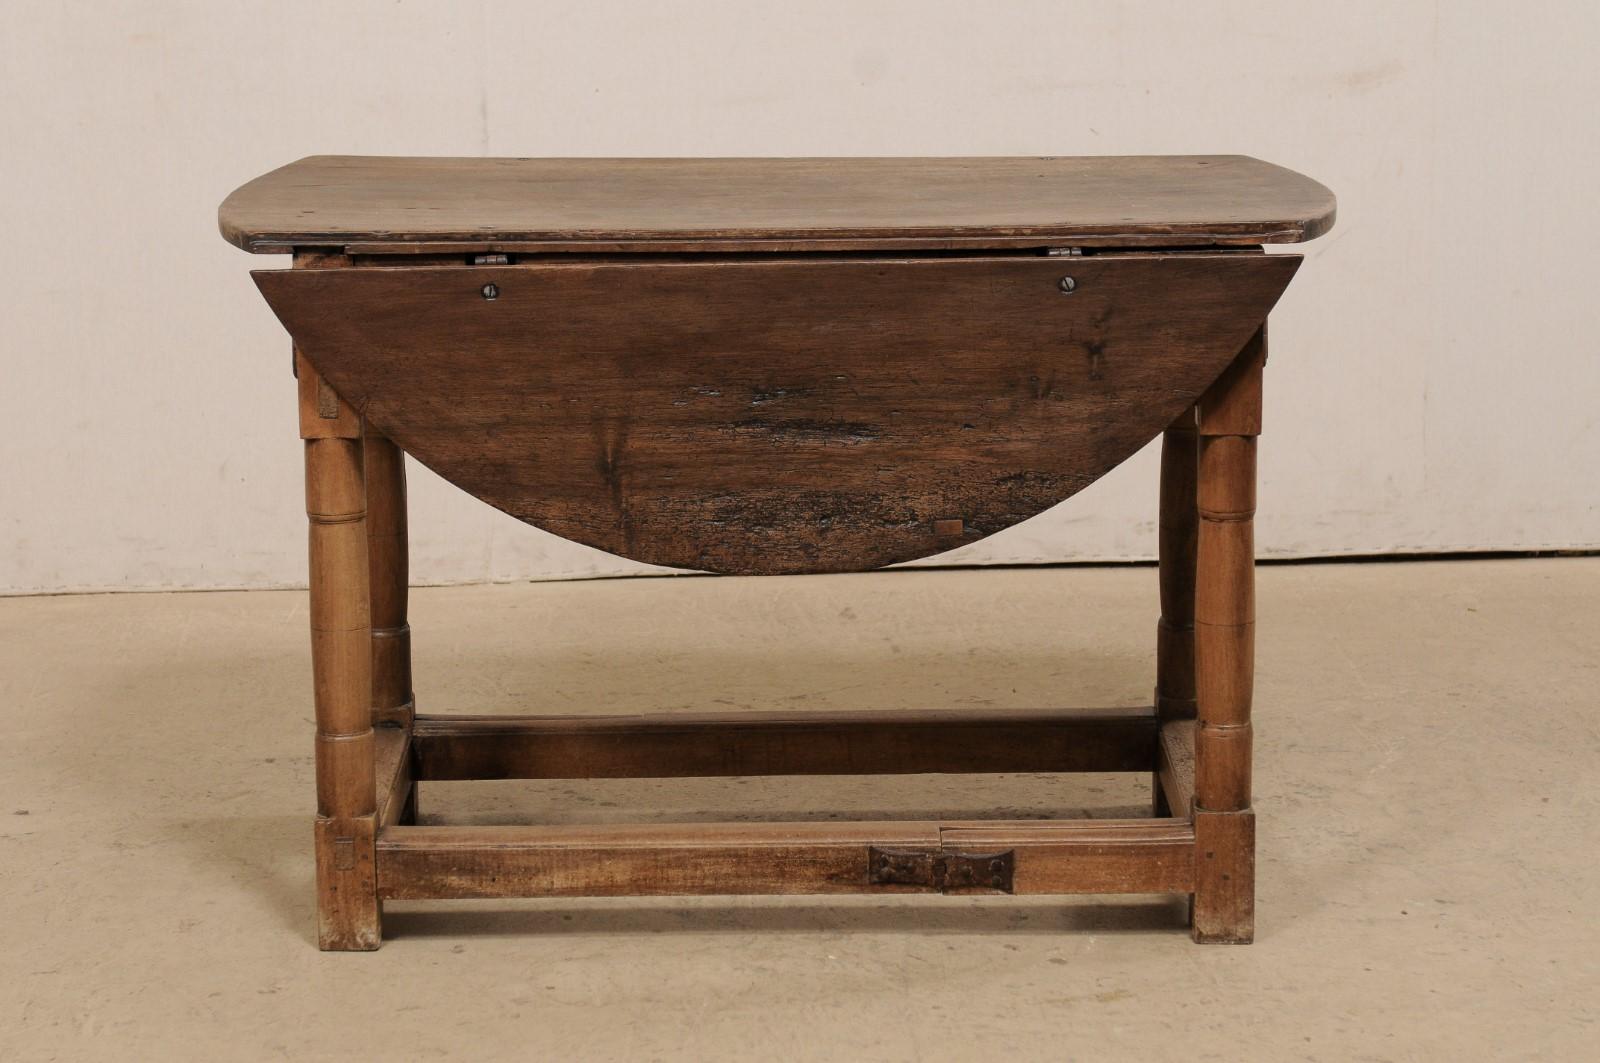 Italian Double Gate-Leg Table w/Drop Leaves on Either Side, Turn of 18th/19th C. For Sale 5